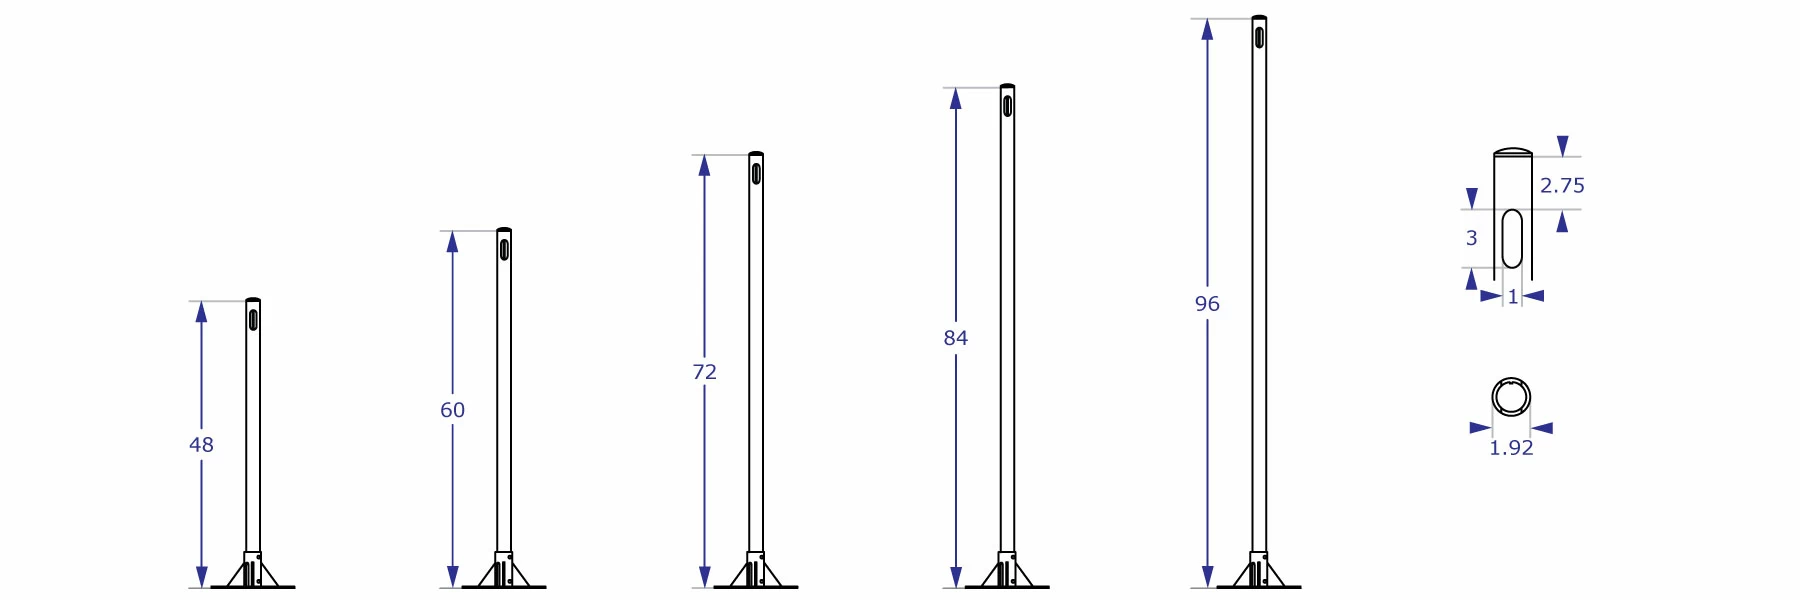 KIOSK-192 pole floor stand specification drawings showing five available pole lengths